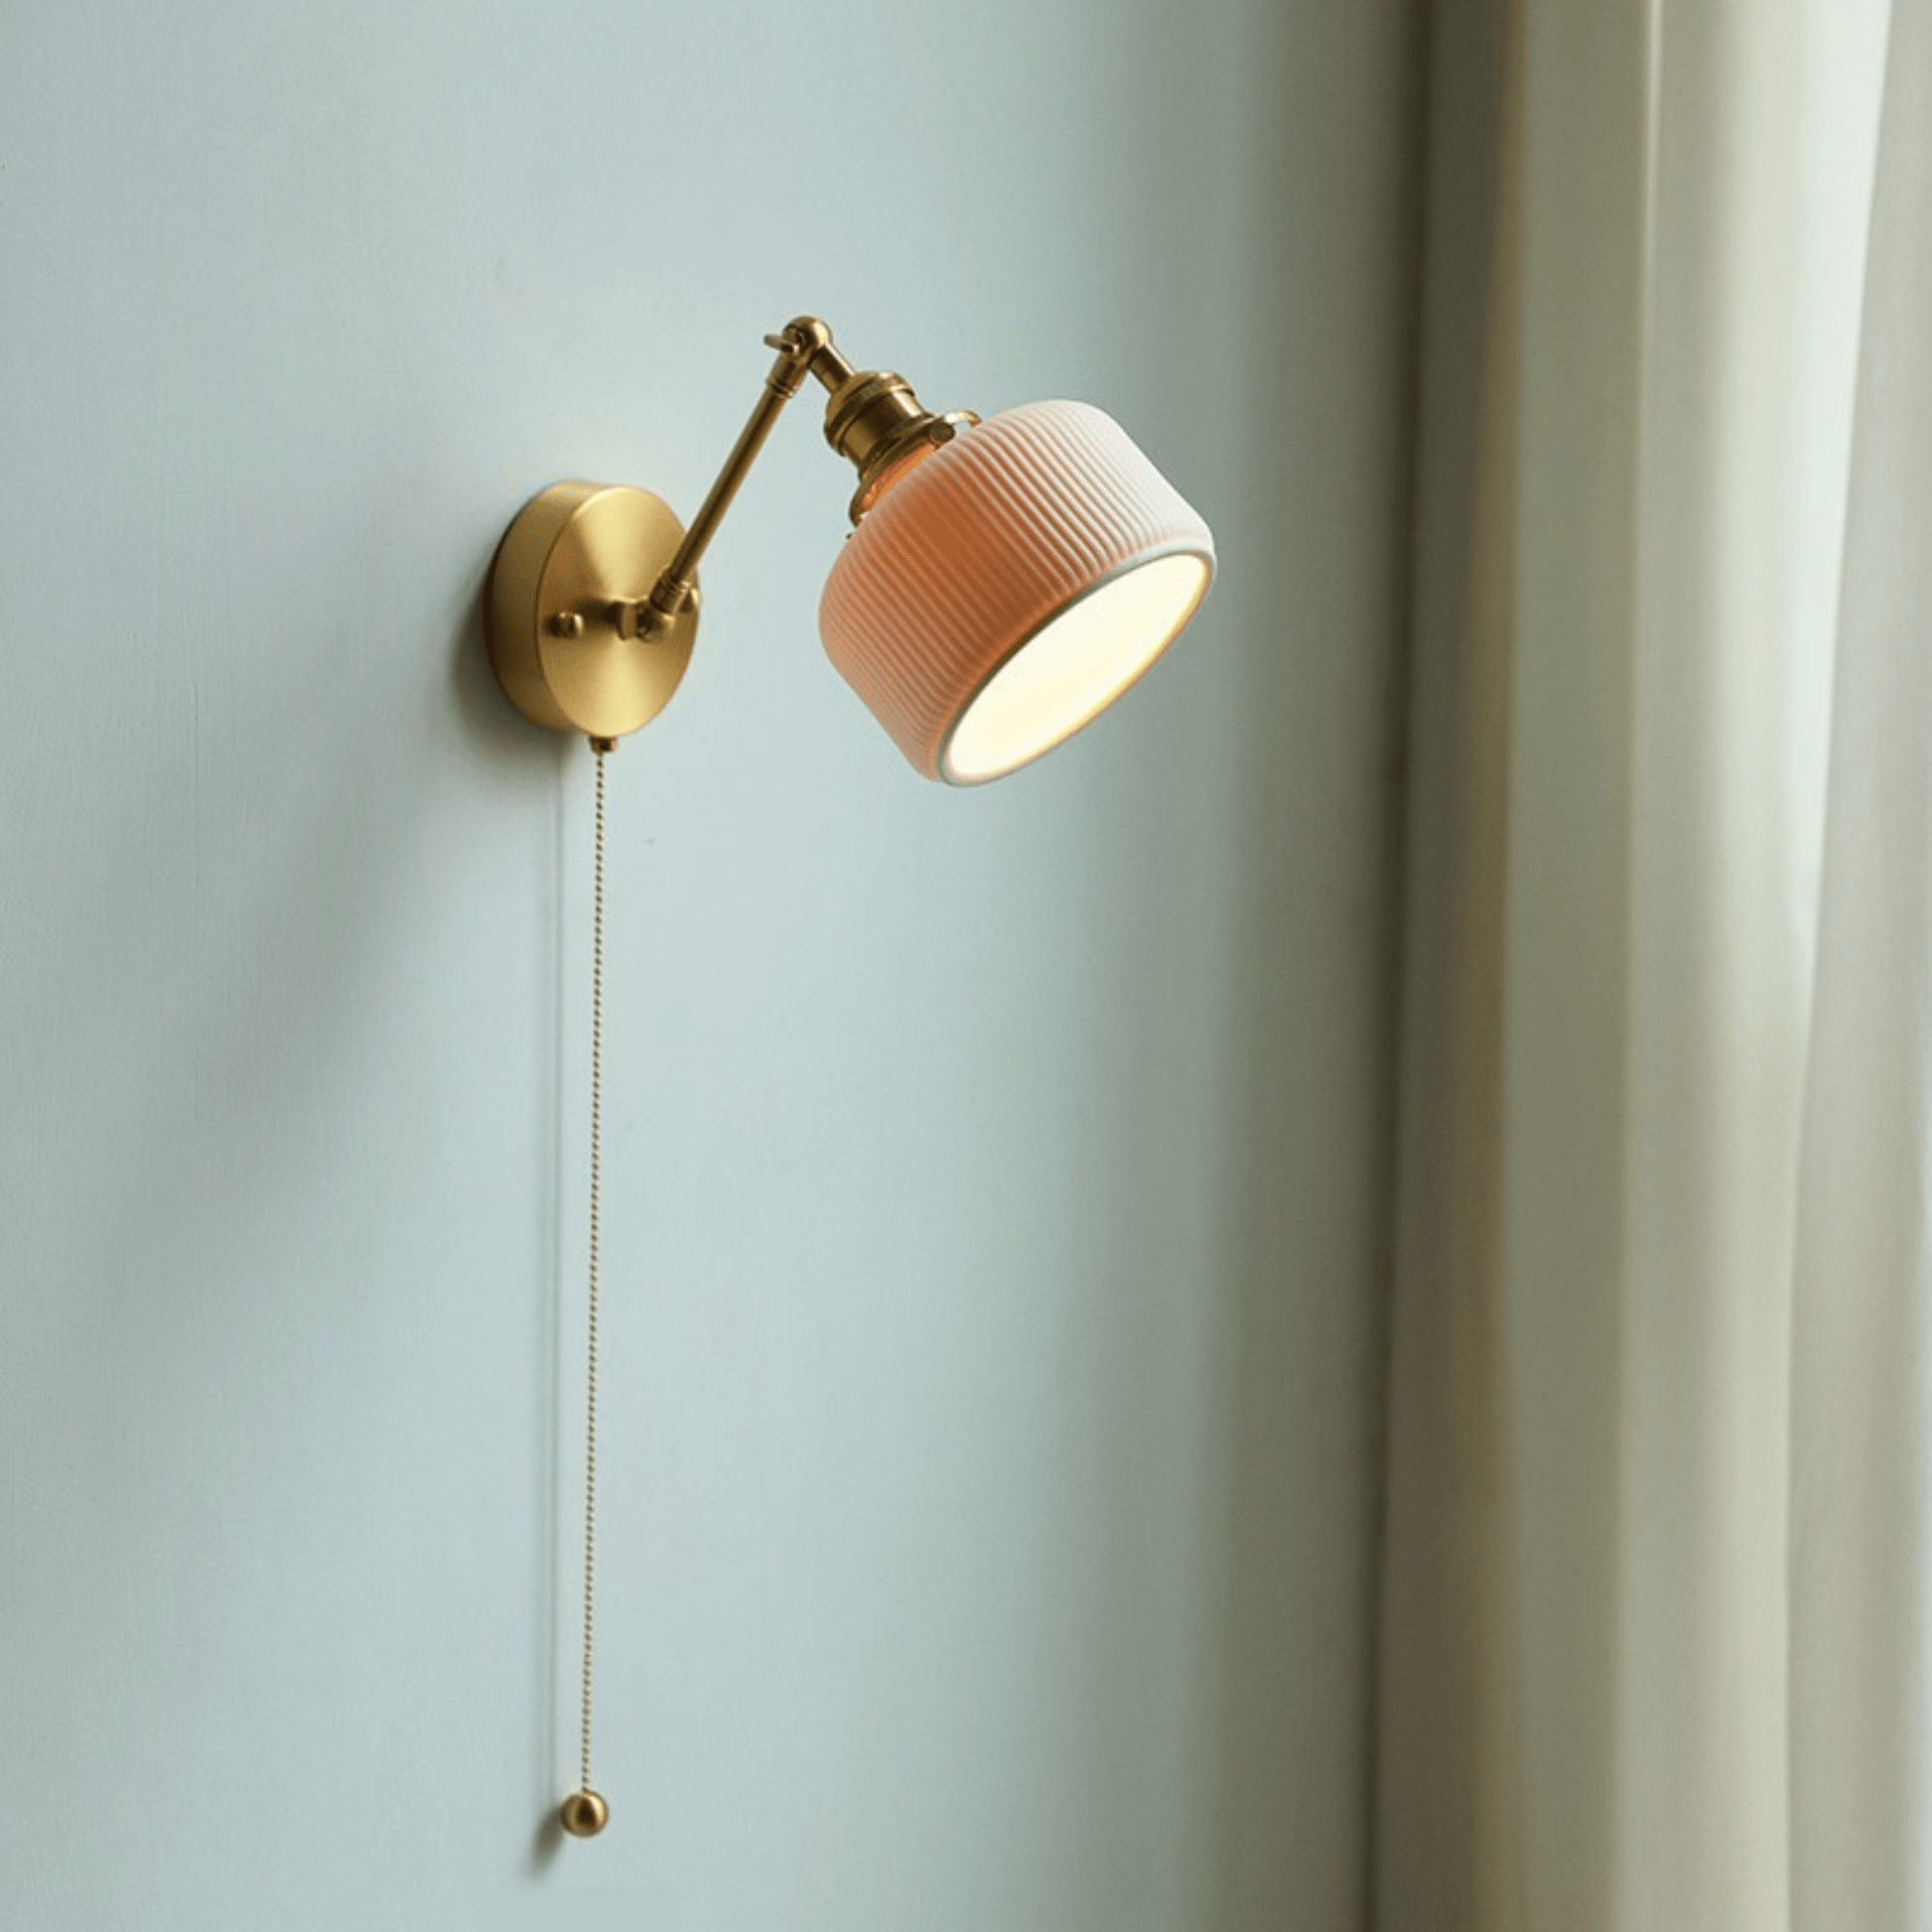 White Ceramic Wall Sconce with Pull Chain Switch – Decluttered Homes